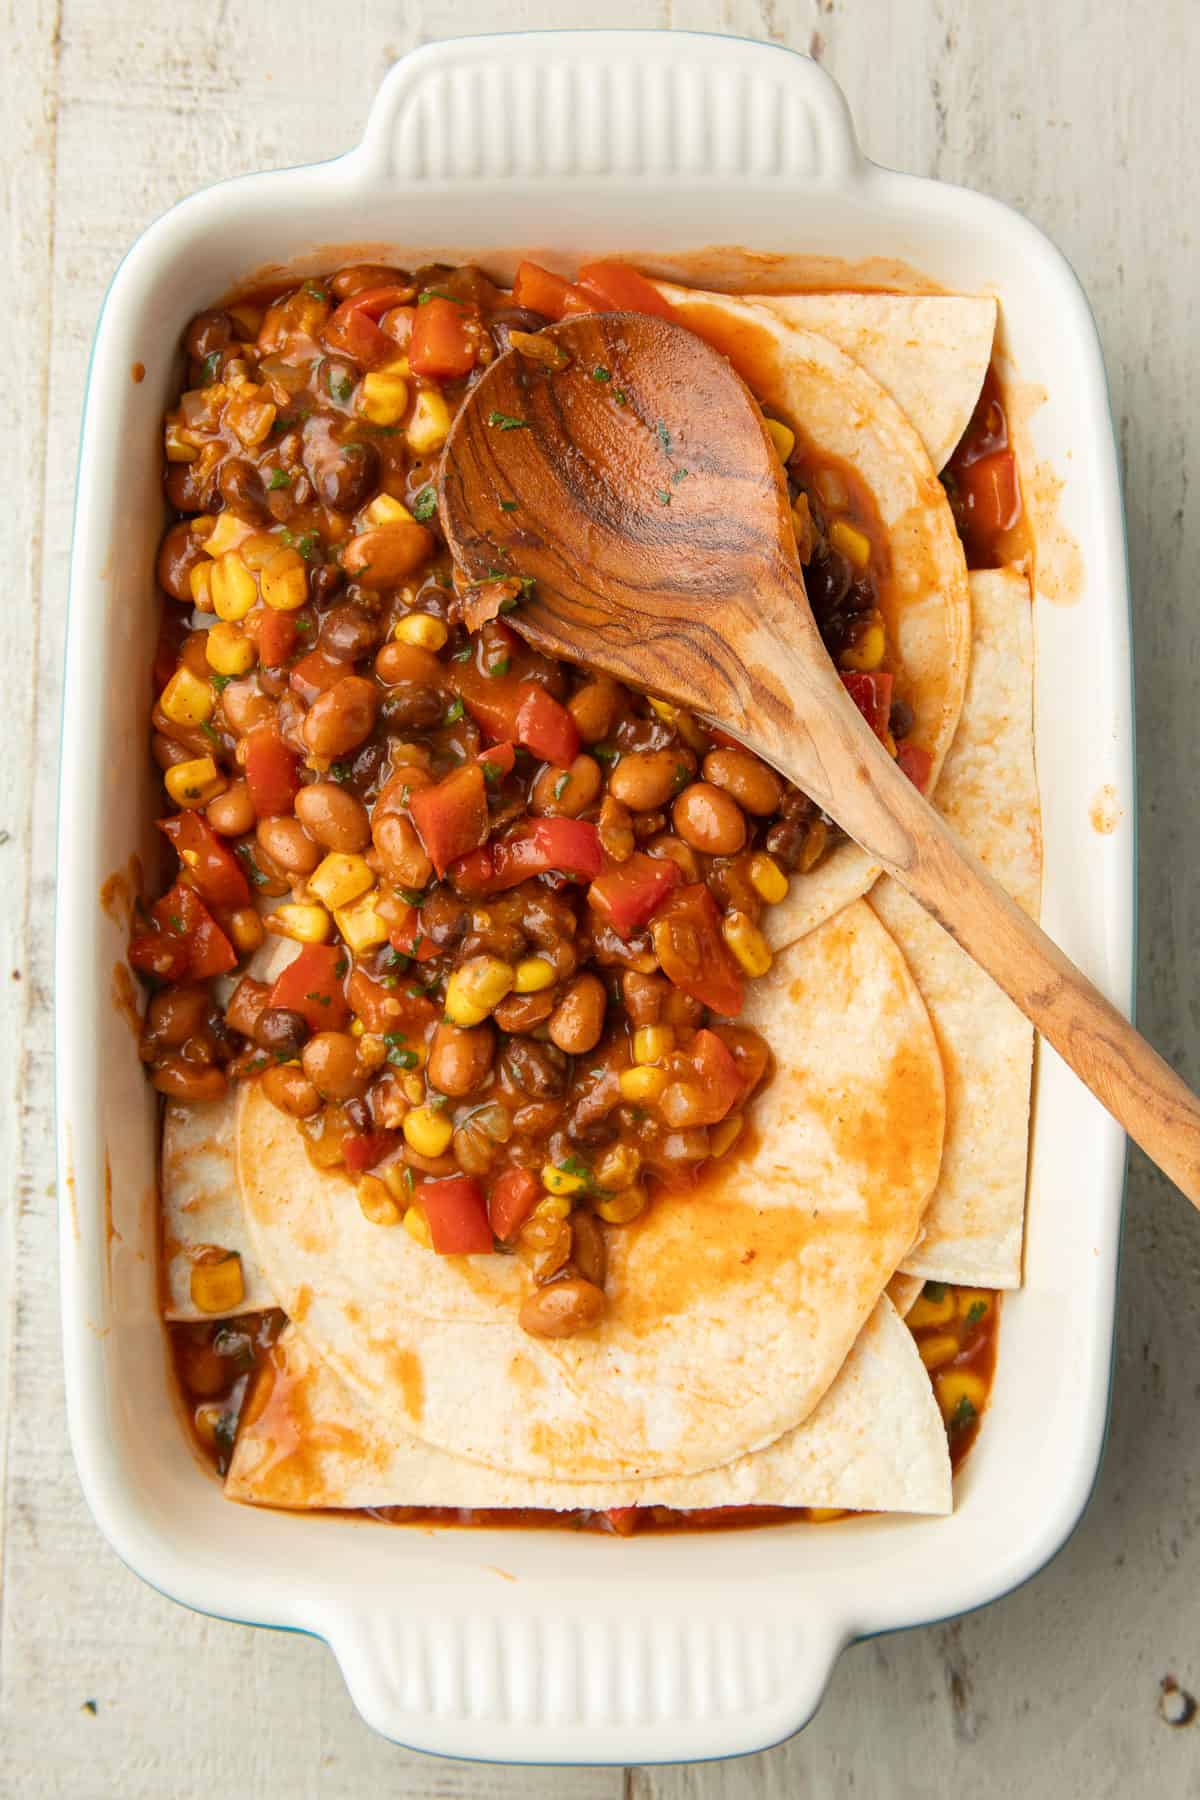 Wooden spoon spreading a layer of enchilada casserole filling over tortillas in a baking dish.